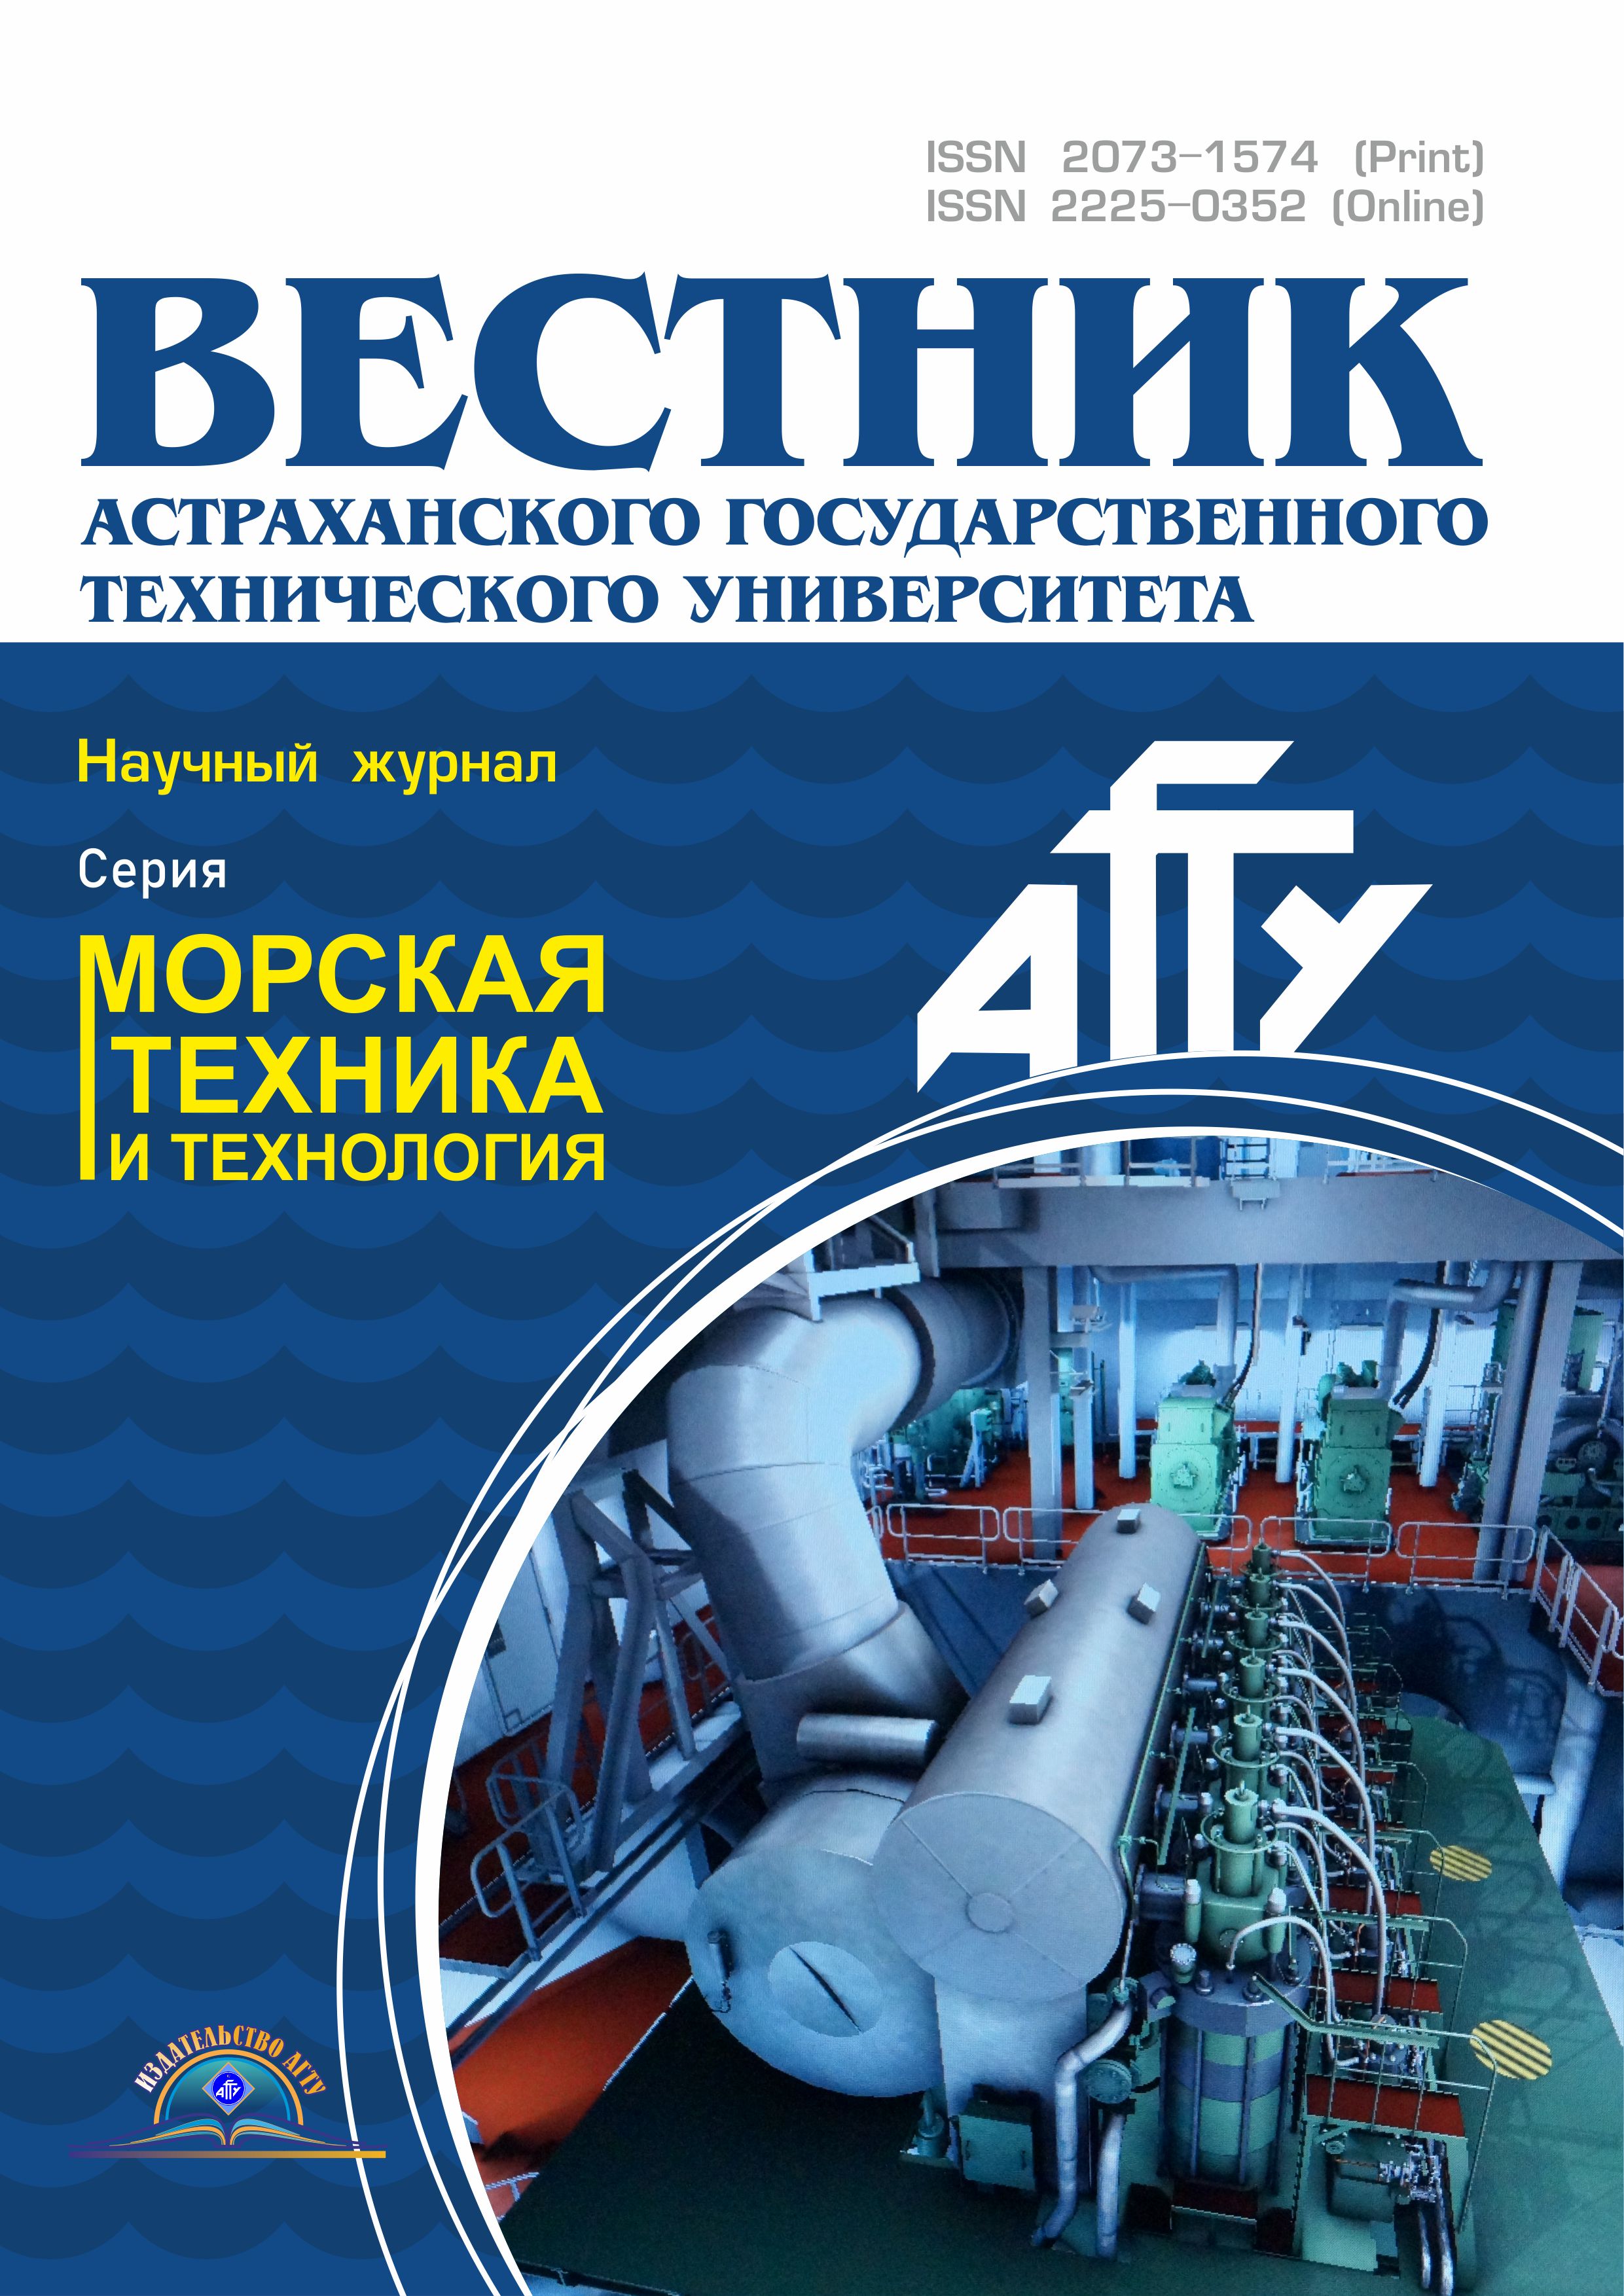                         DEVELOPMENT OF THE METHODS OF ACTUALIZATION OF PROFESSIONAL GOALS OF STUDENTS OF THE INSTITUTE OF MARINE TECHNOLOGIES, POWER ENGINEERING AND TRANSPORT
            